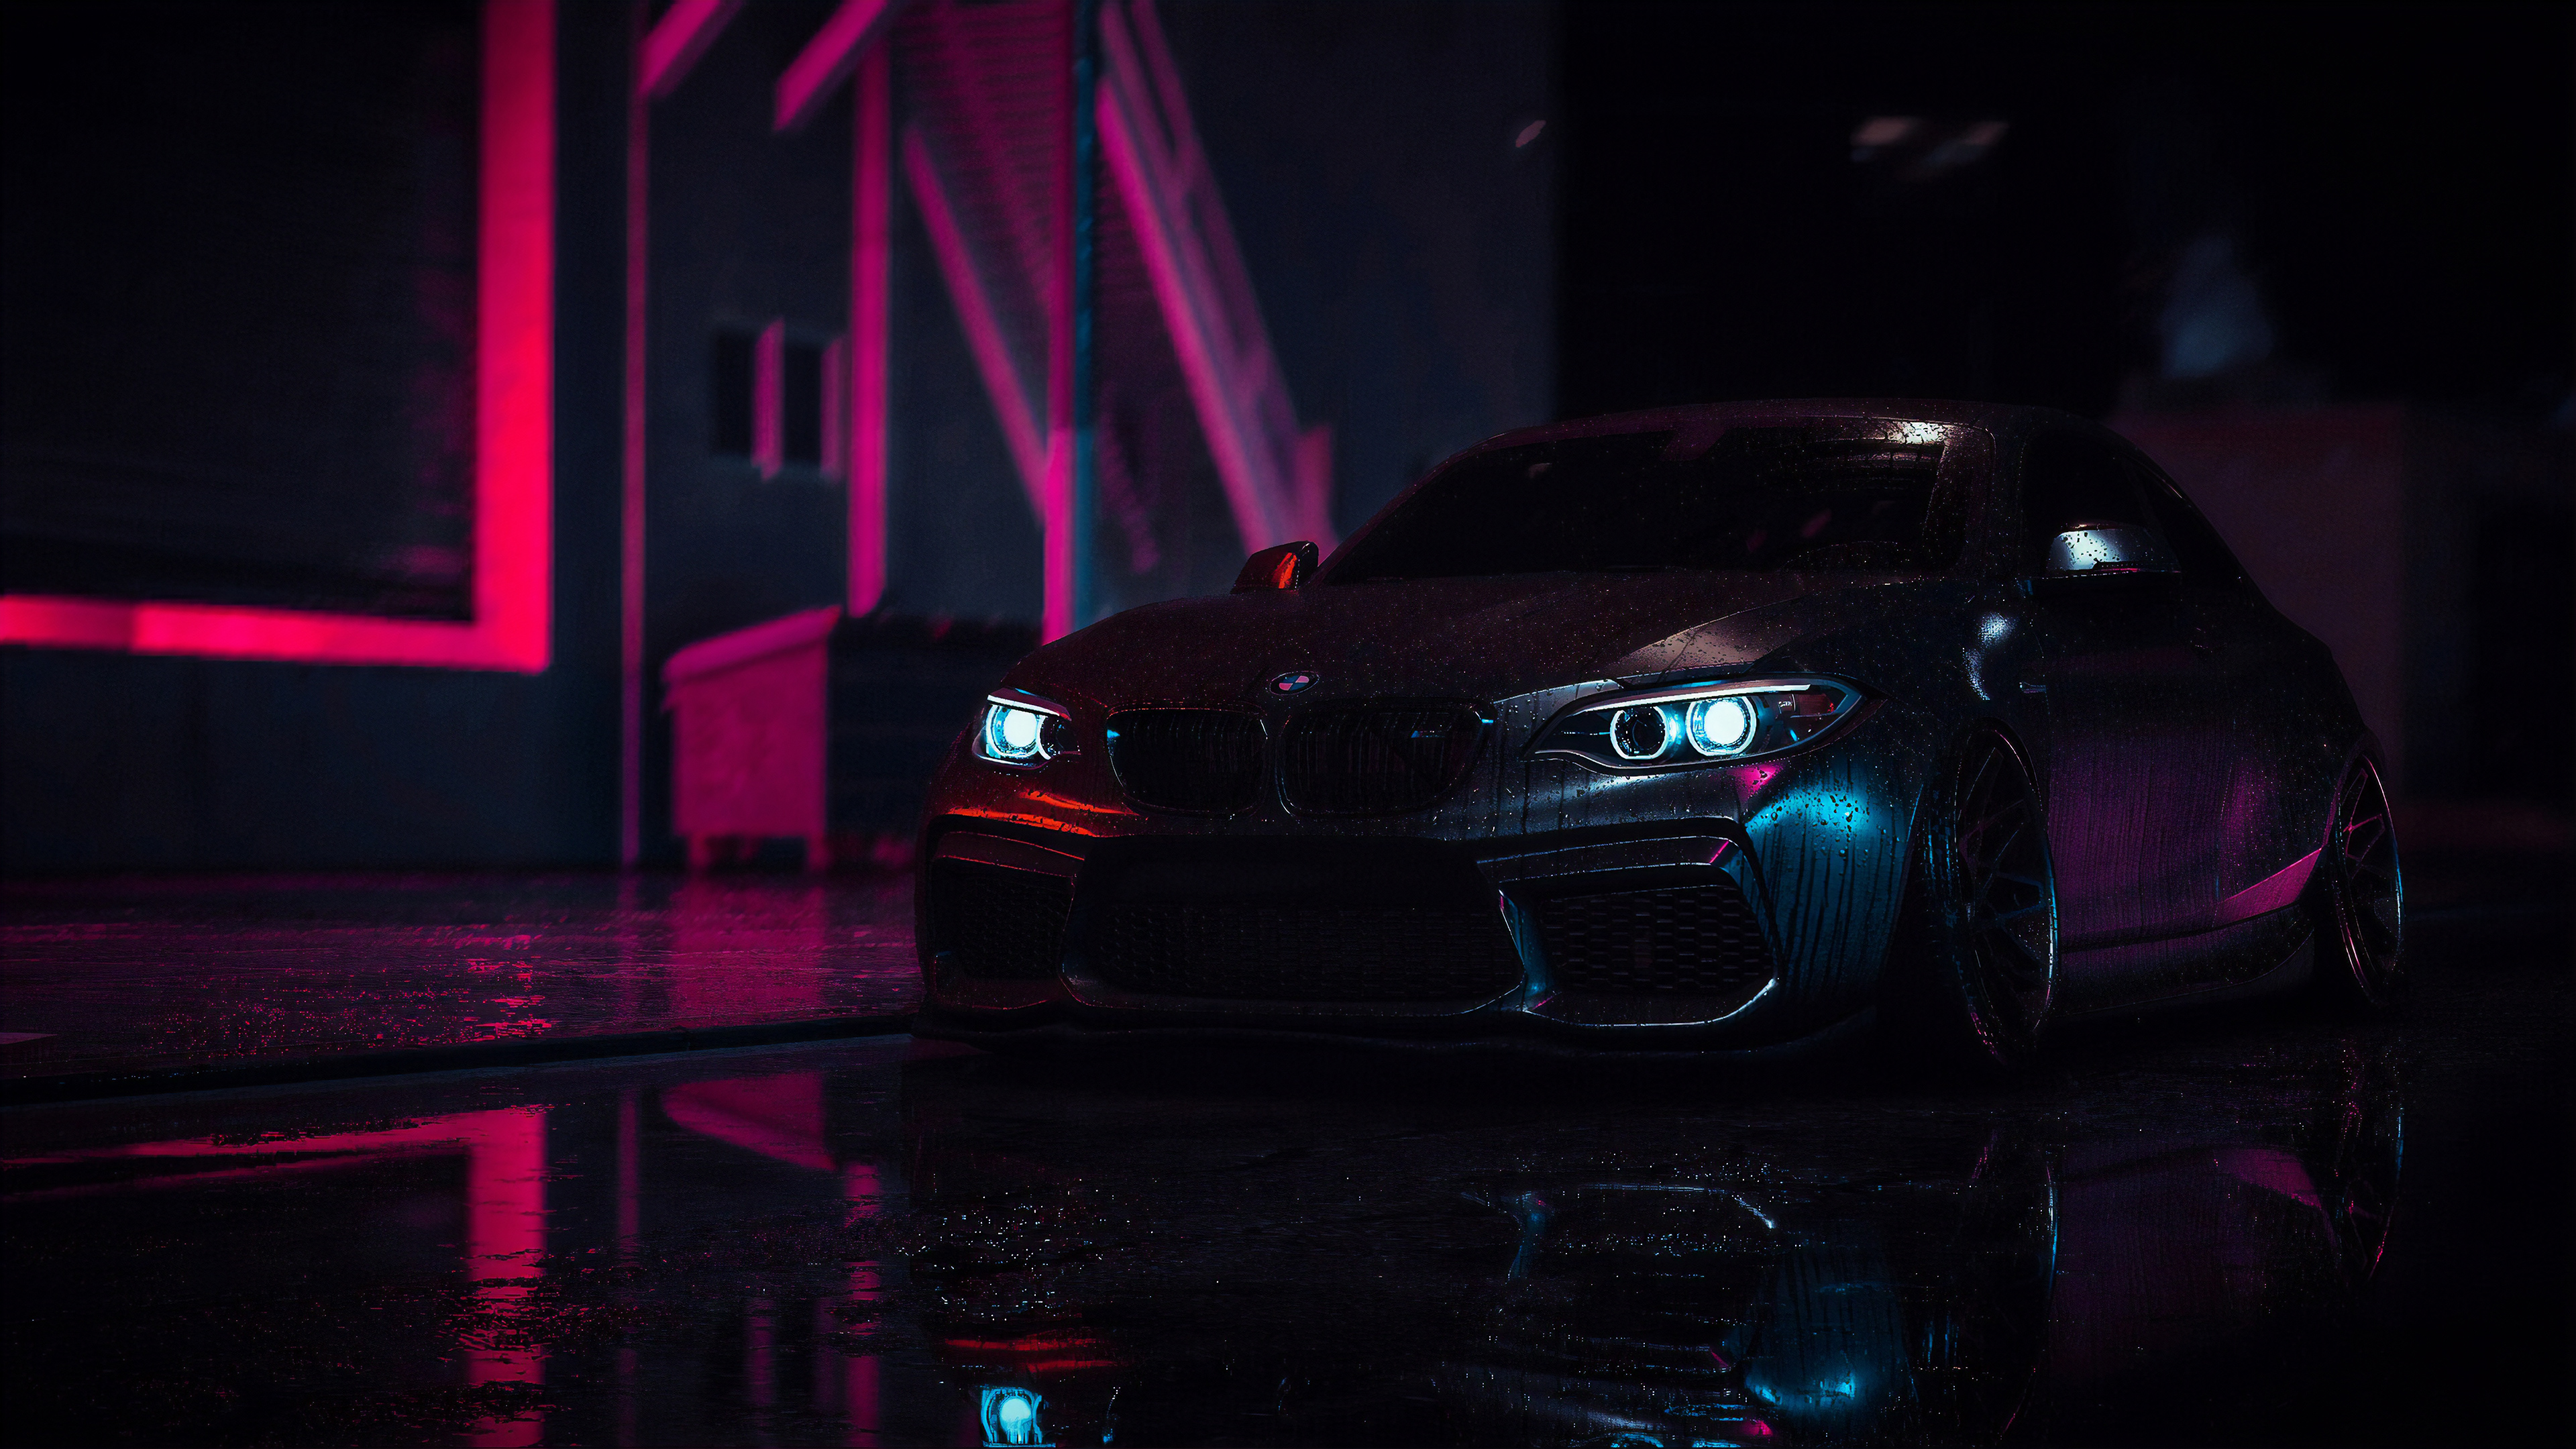 Bmw M2 Nfs Raining need for speed wallpapers, hd ...